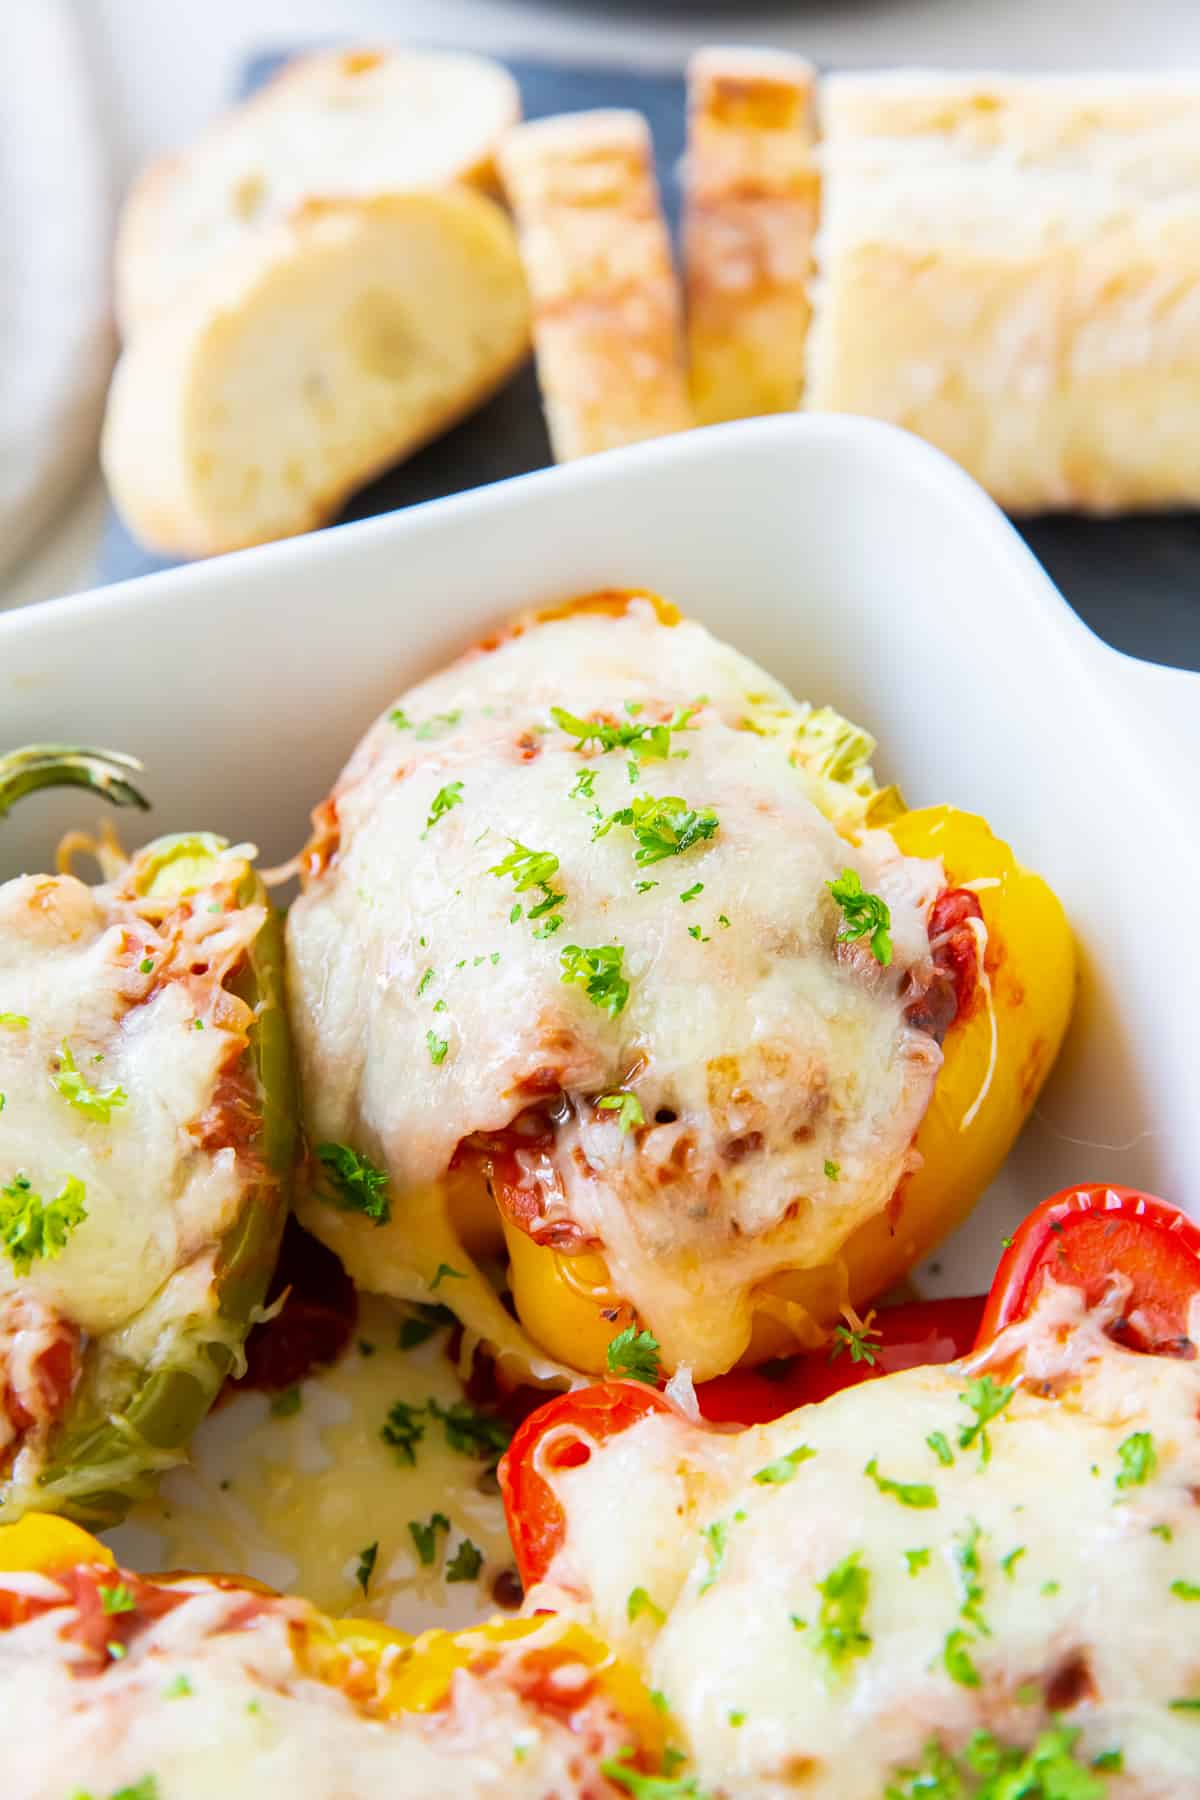 Stuffed peppers in a baking dish next to sliced French bread.